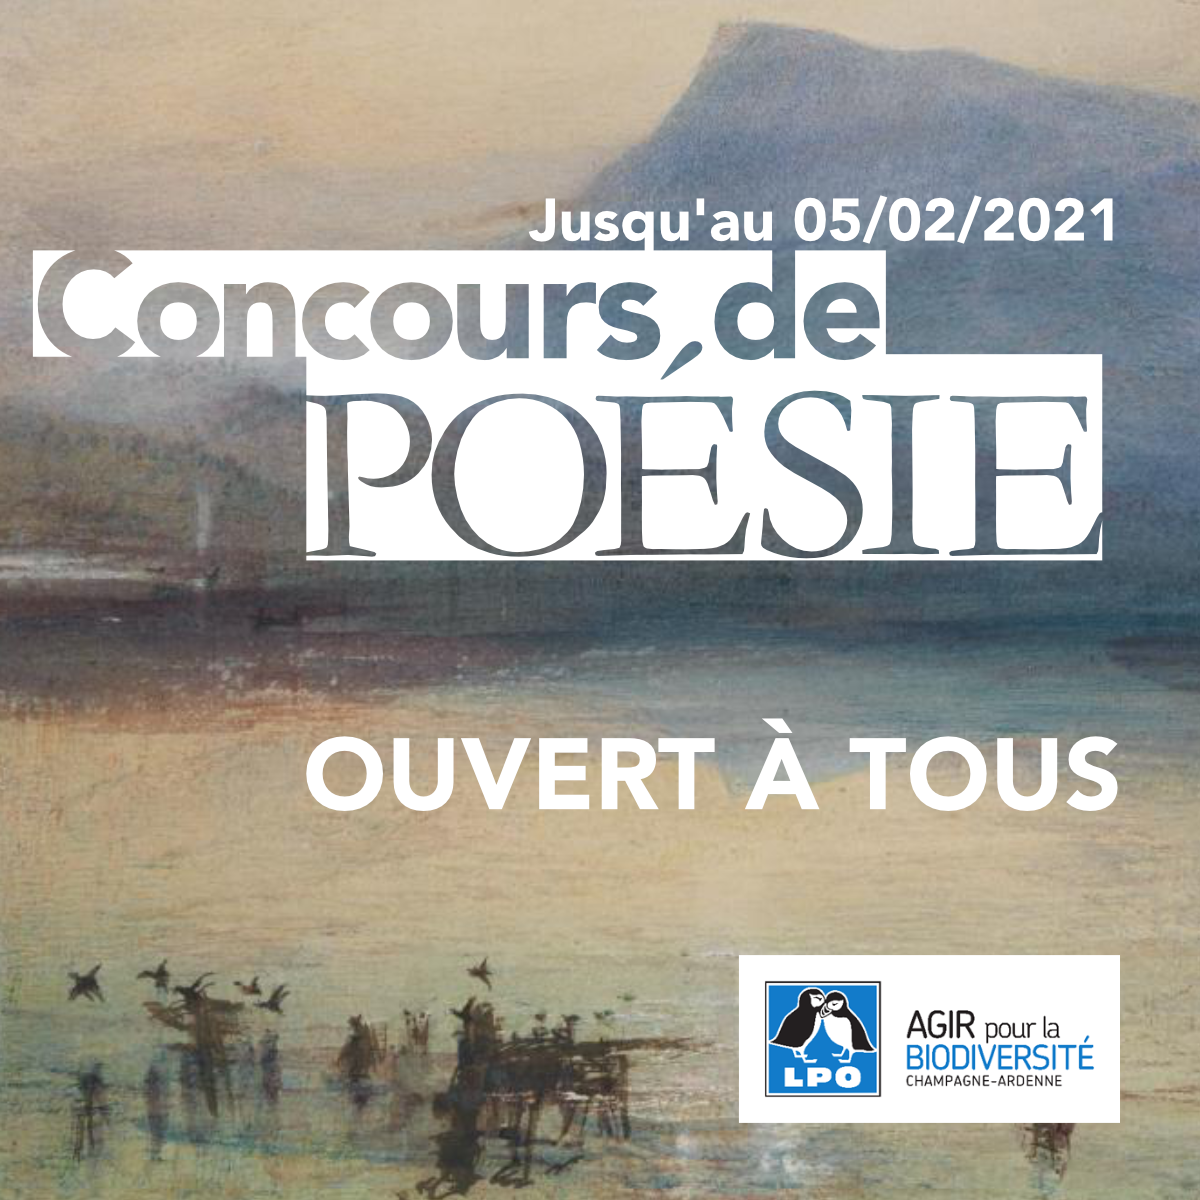 image fb twitter concours poesie